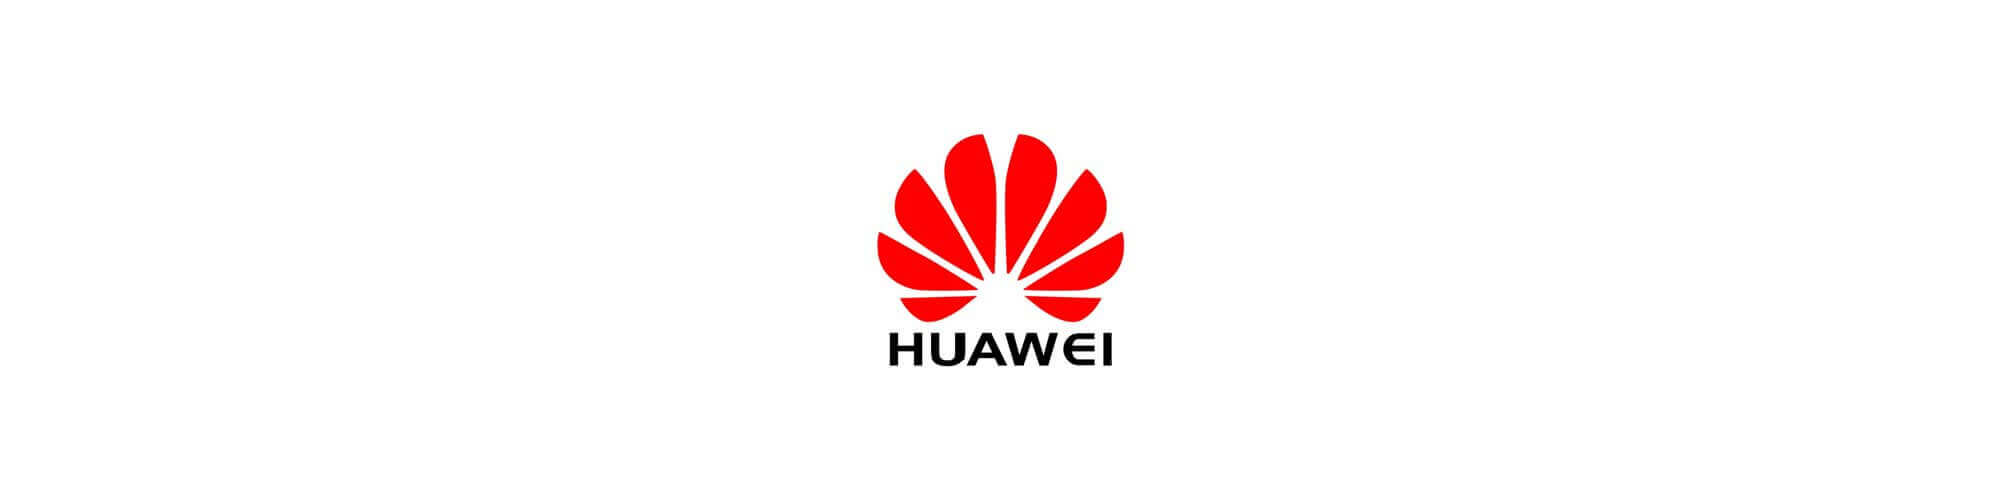  Huawei P20 Pro  Mate 10   Android 10  EMUI 10 